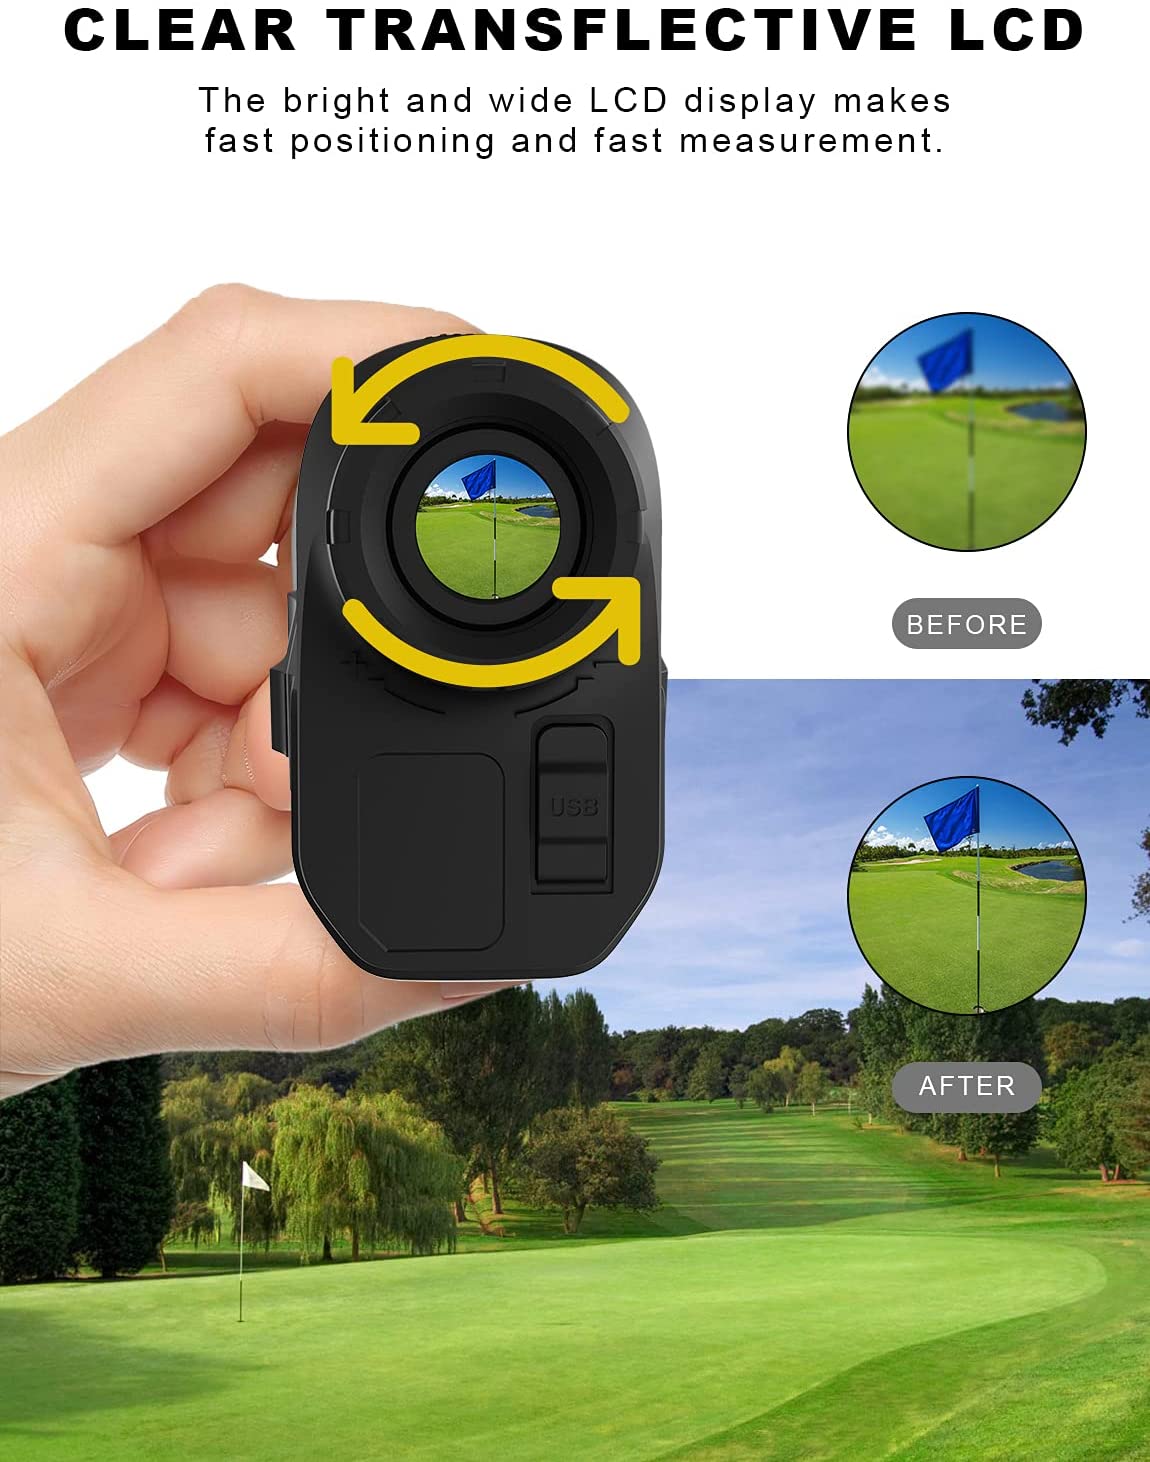 Mileseey Professional Laser Golf Rangefinder 660 Yards with Slope Compensation, ±0.55 yard Accuracy